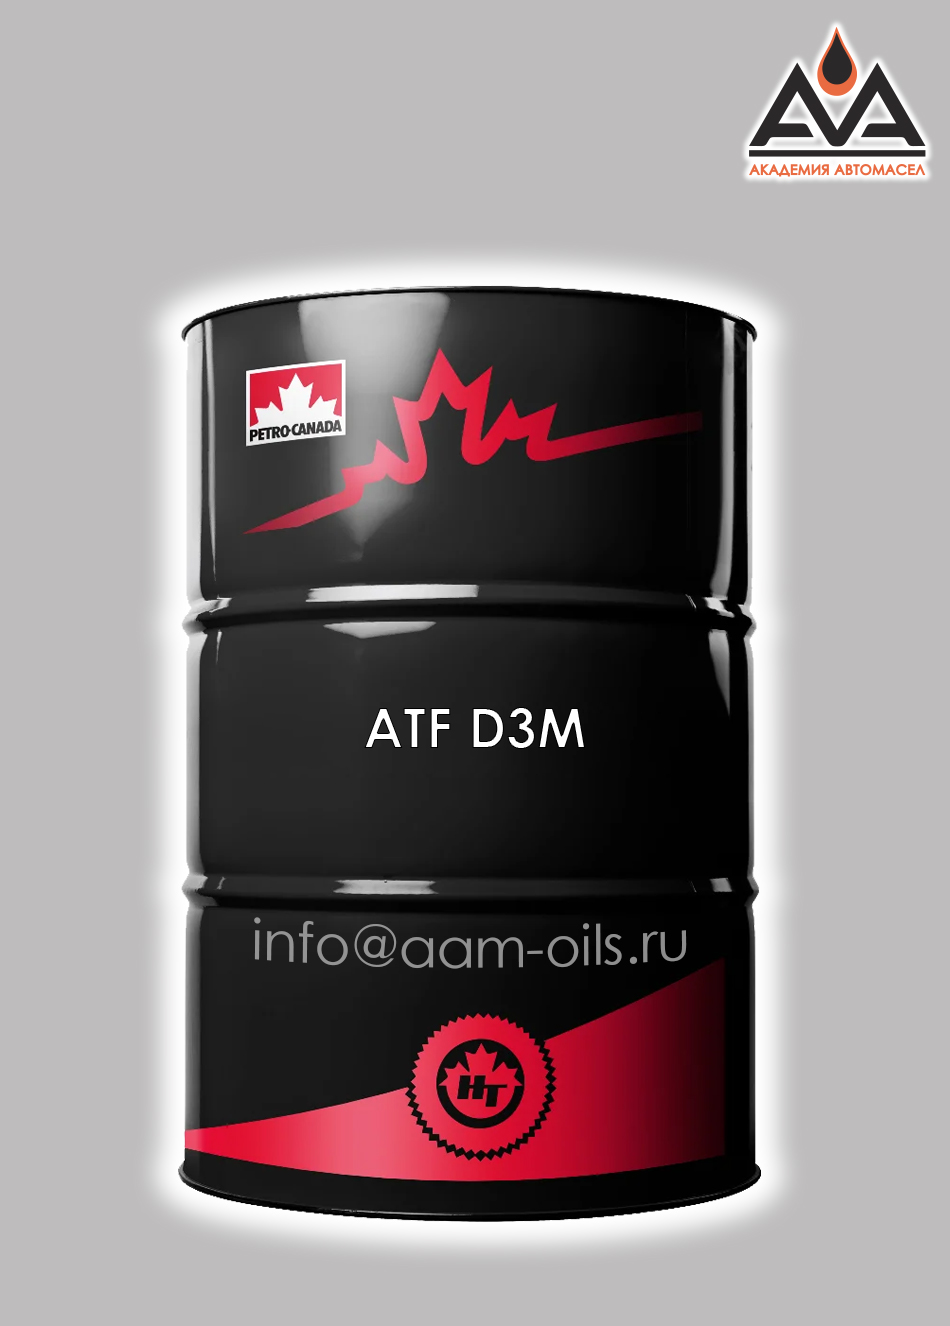 Atf d iii. Масло Petro Canada ATF d3m. Petro-Canada 10w30 205л. Масло Петро Канада 10w30 SHP Duron. ATF d3m аналоги.